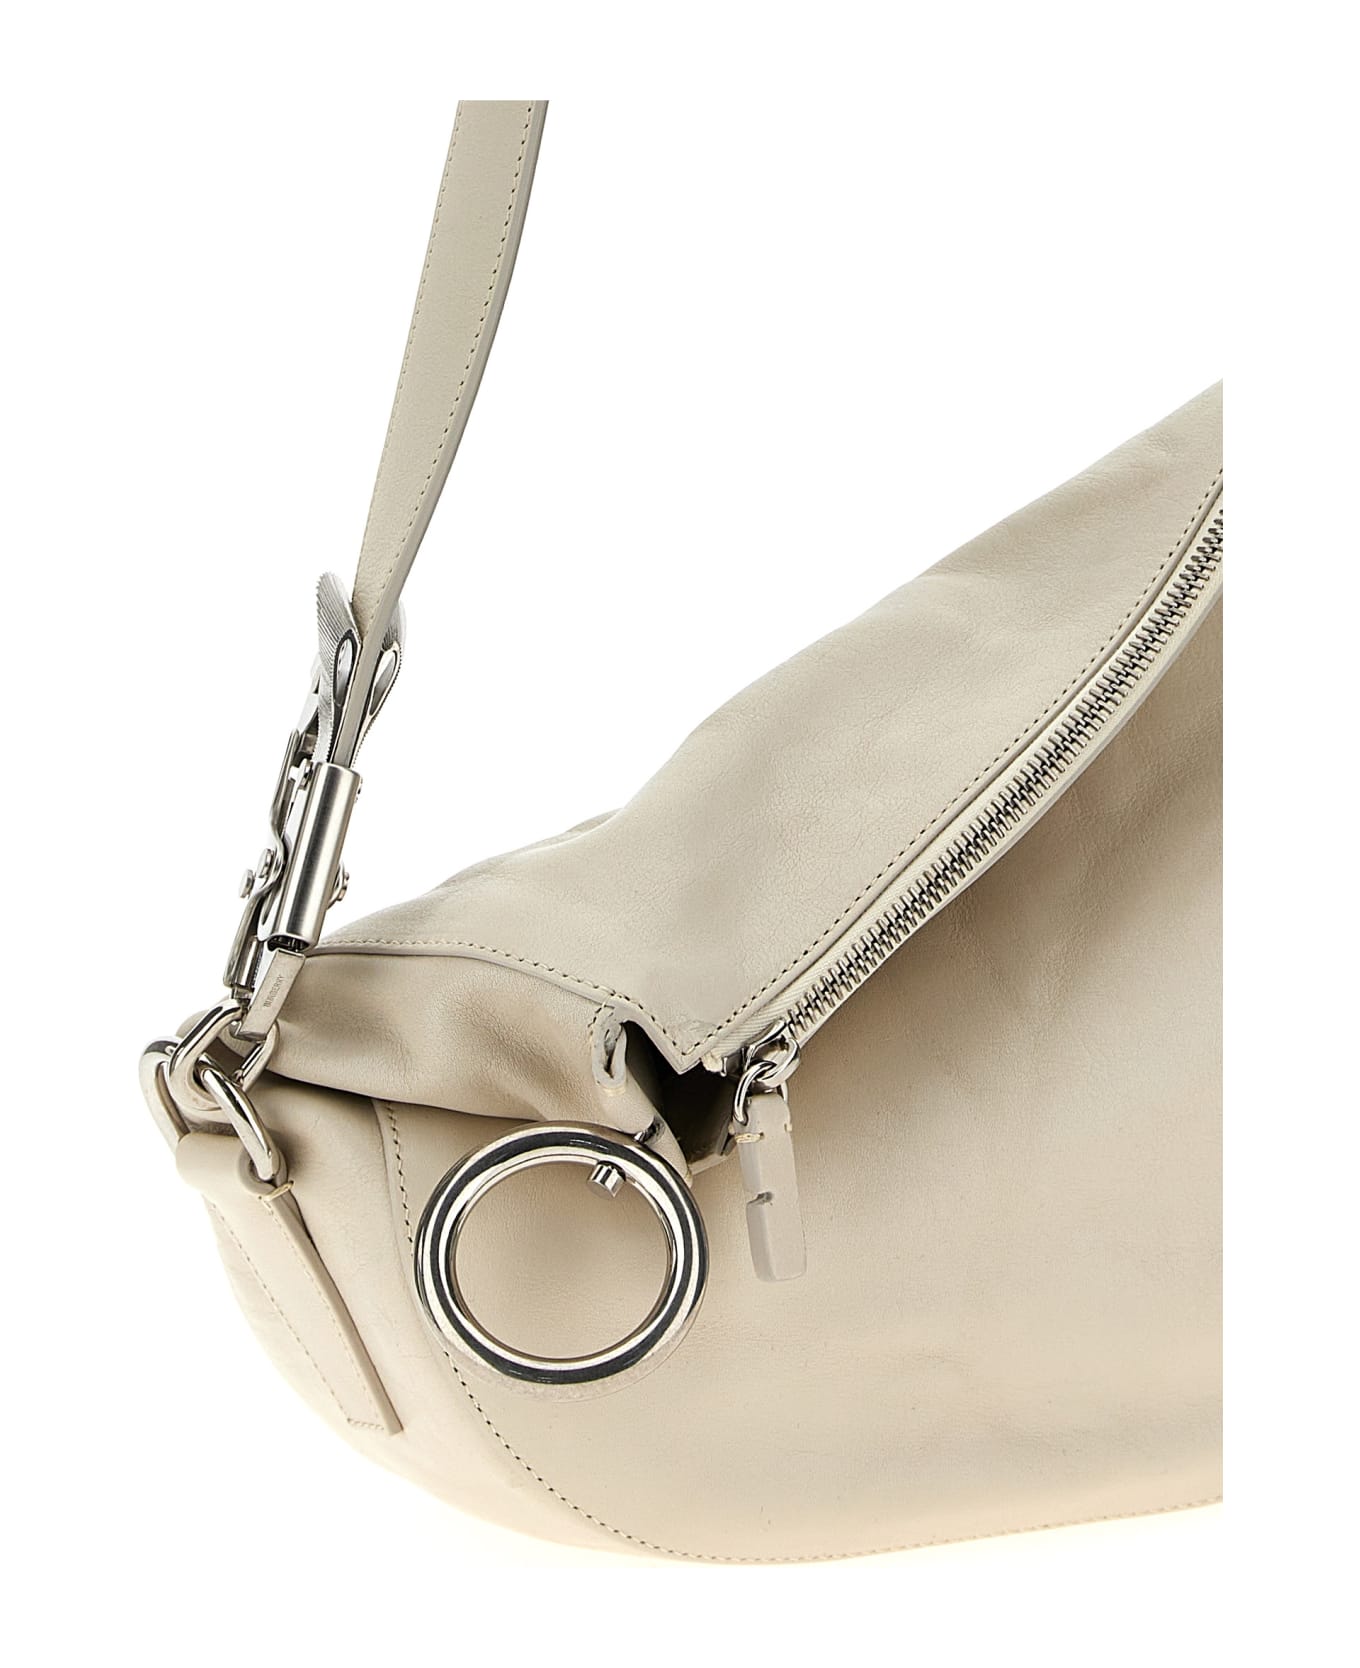 Burberry 'knight' Small Shoulder Bag - Beige